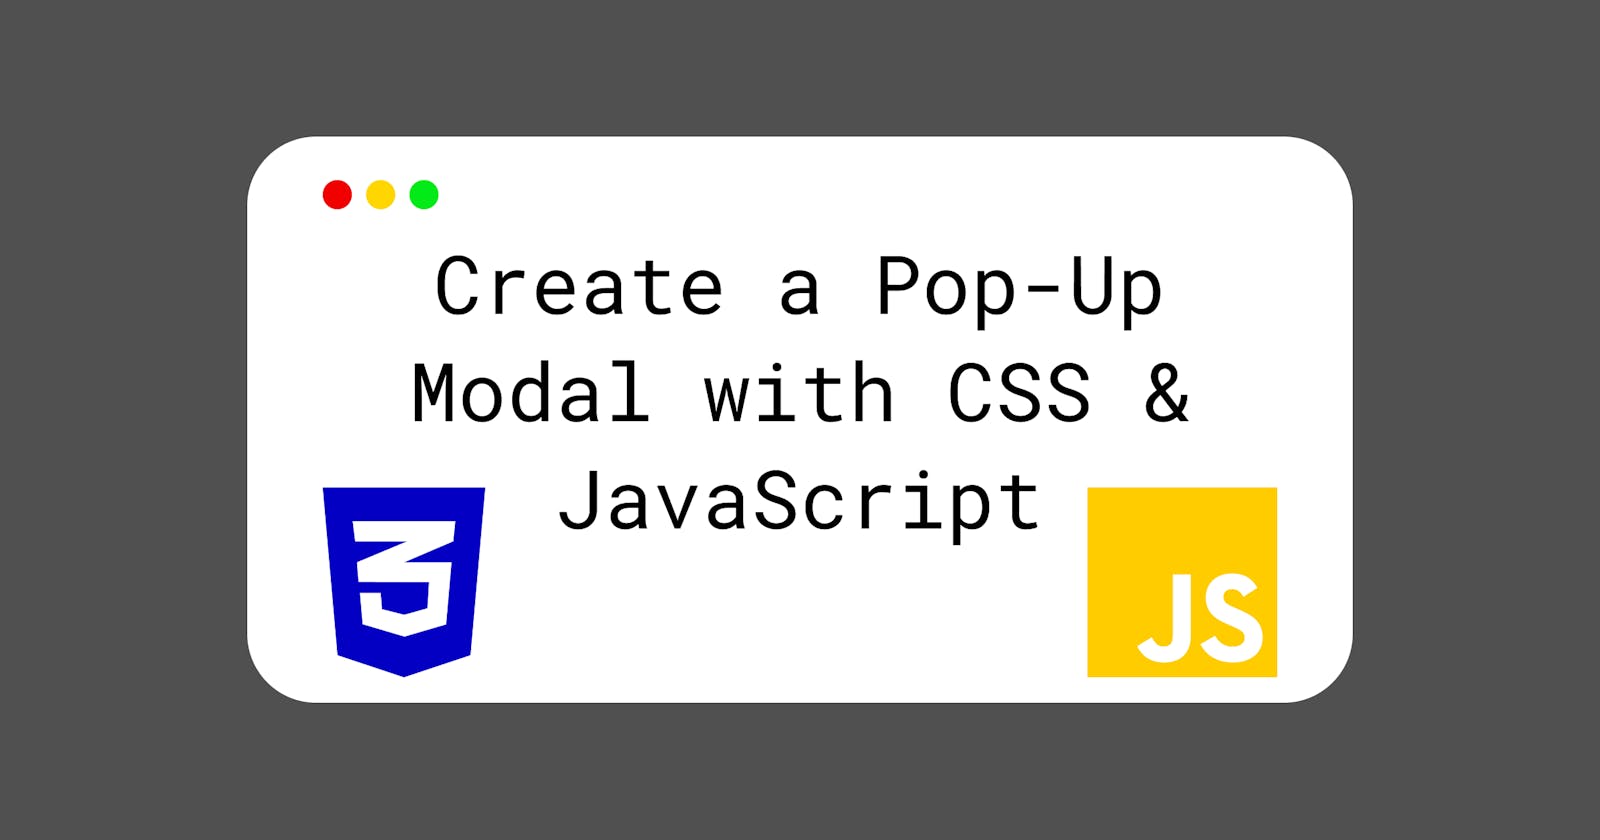 Create a Pop-Up Modal with CSS & JavaScript